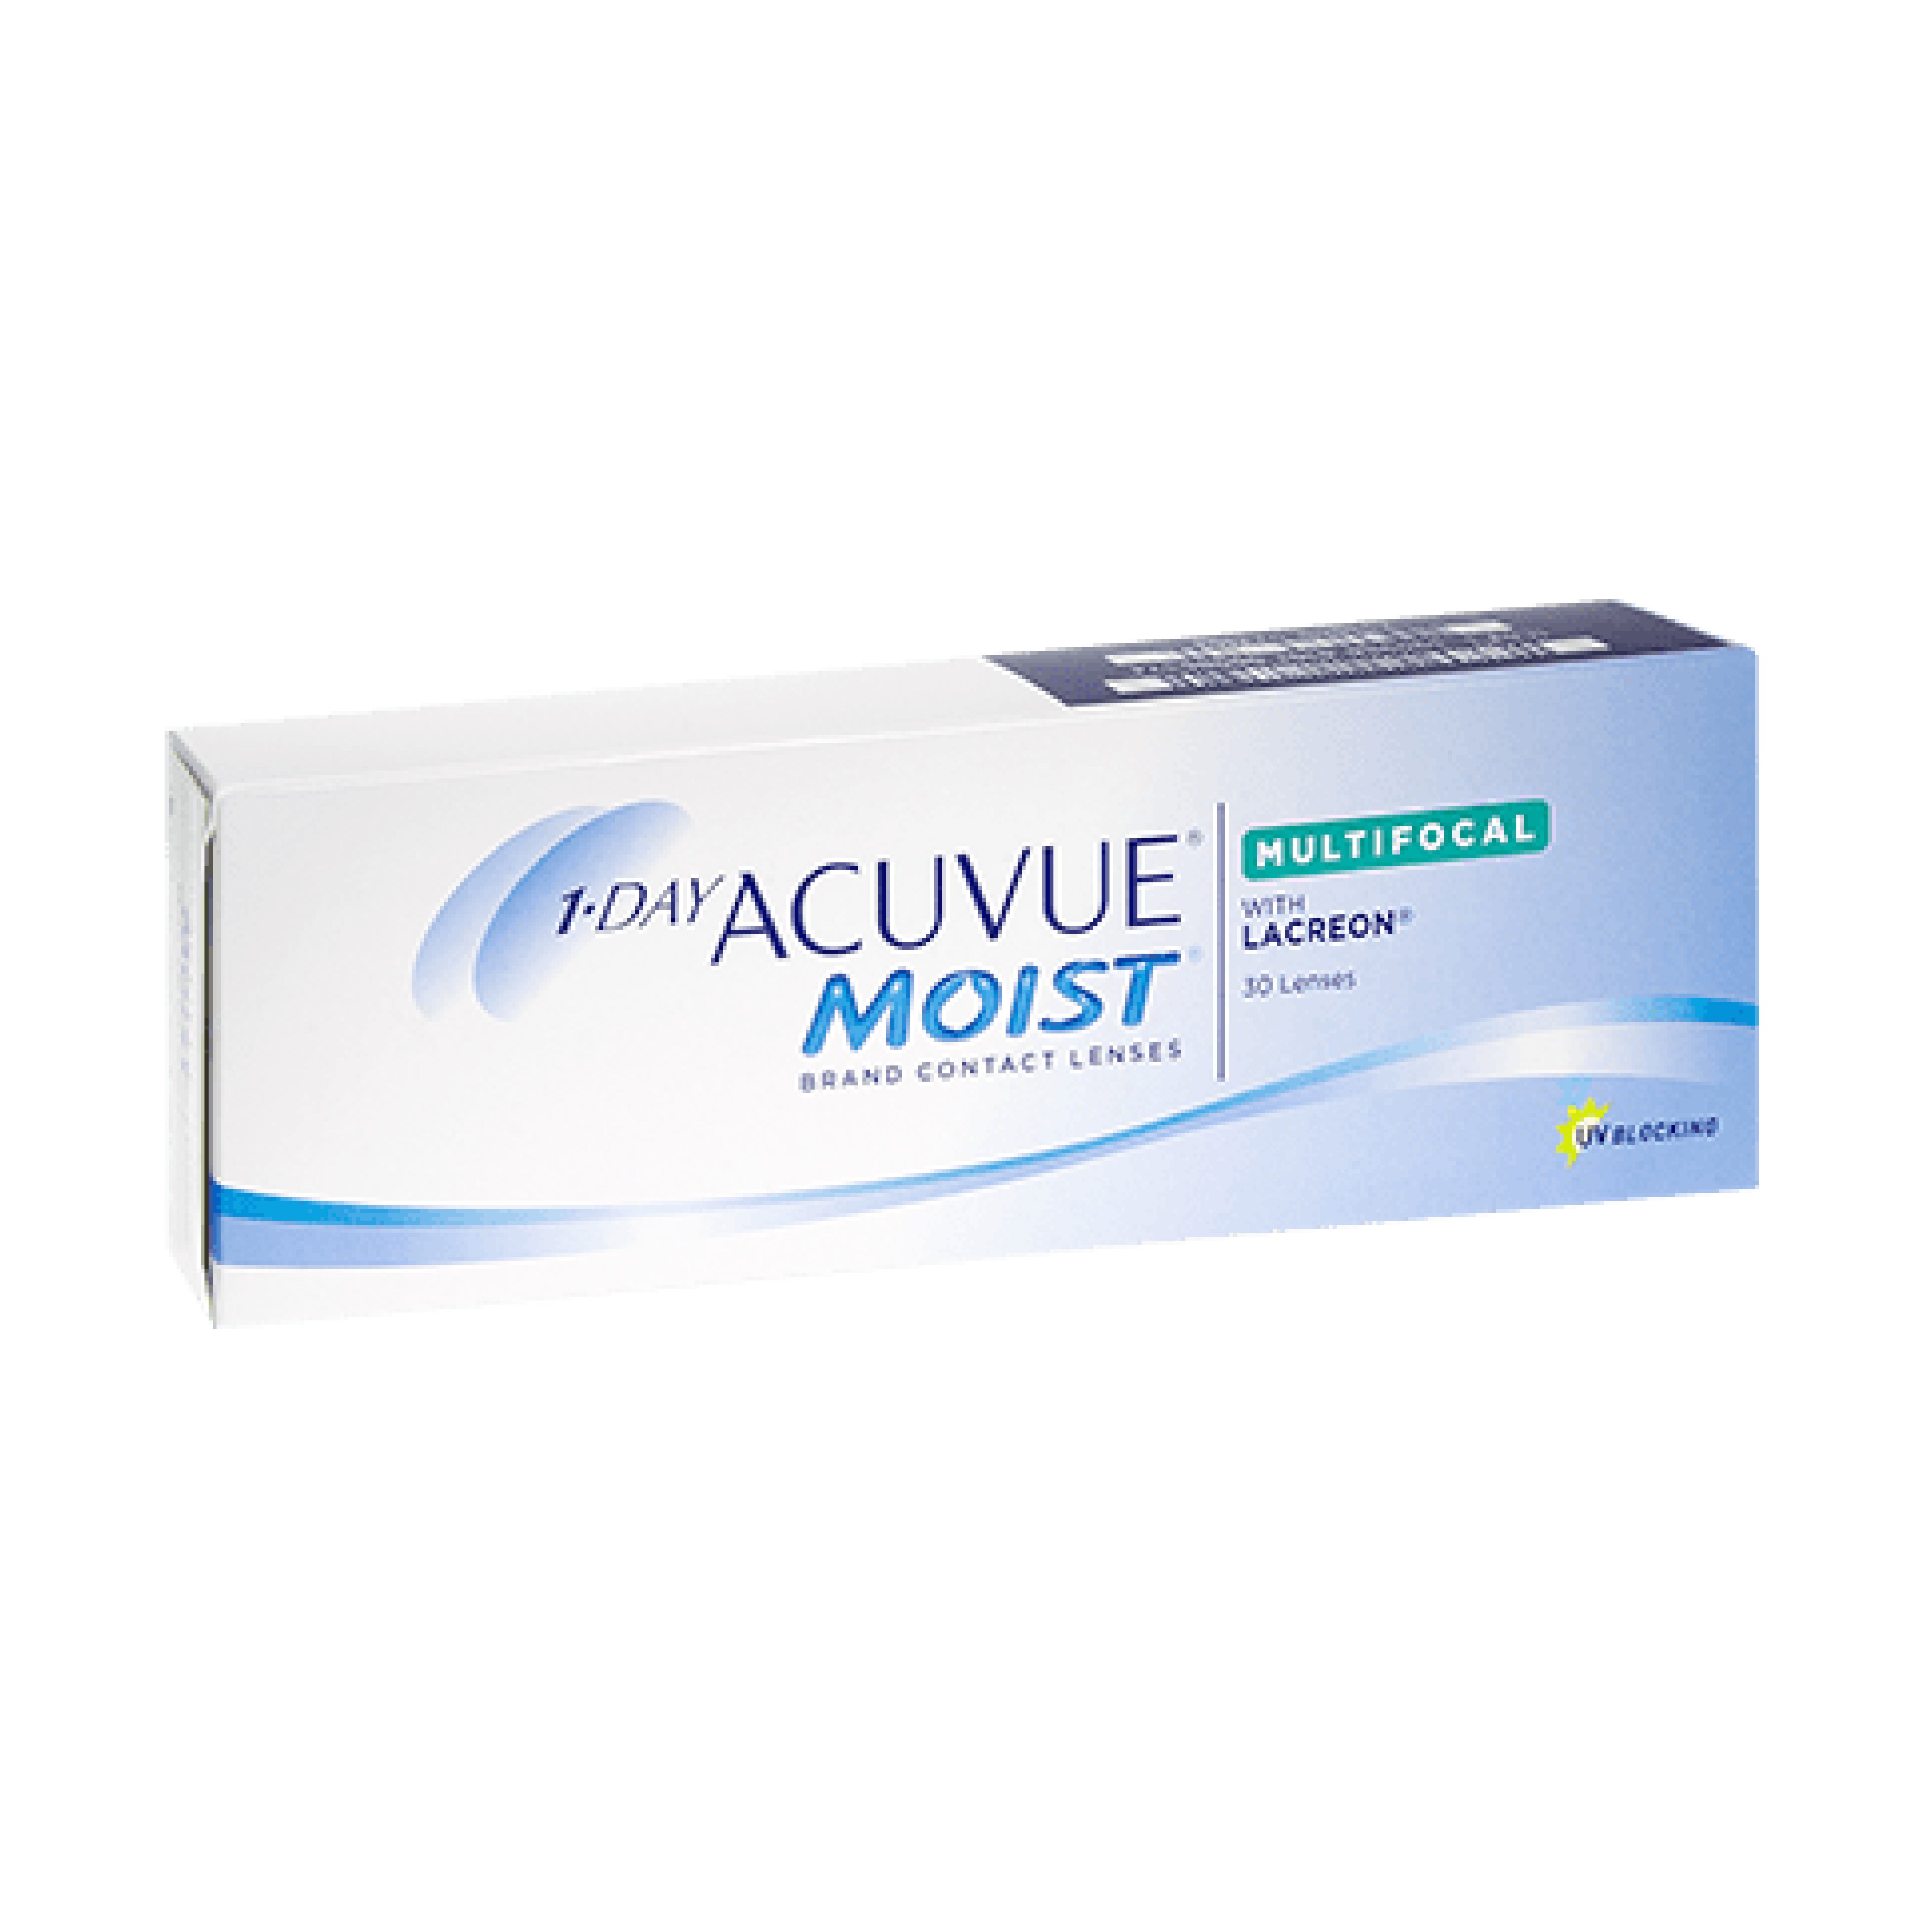 1 Day Acuvue Moist for Multifocal (30 PCS)